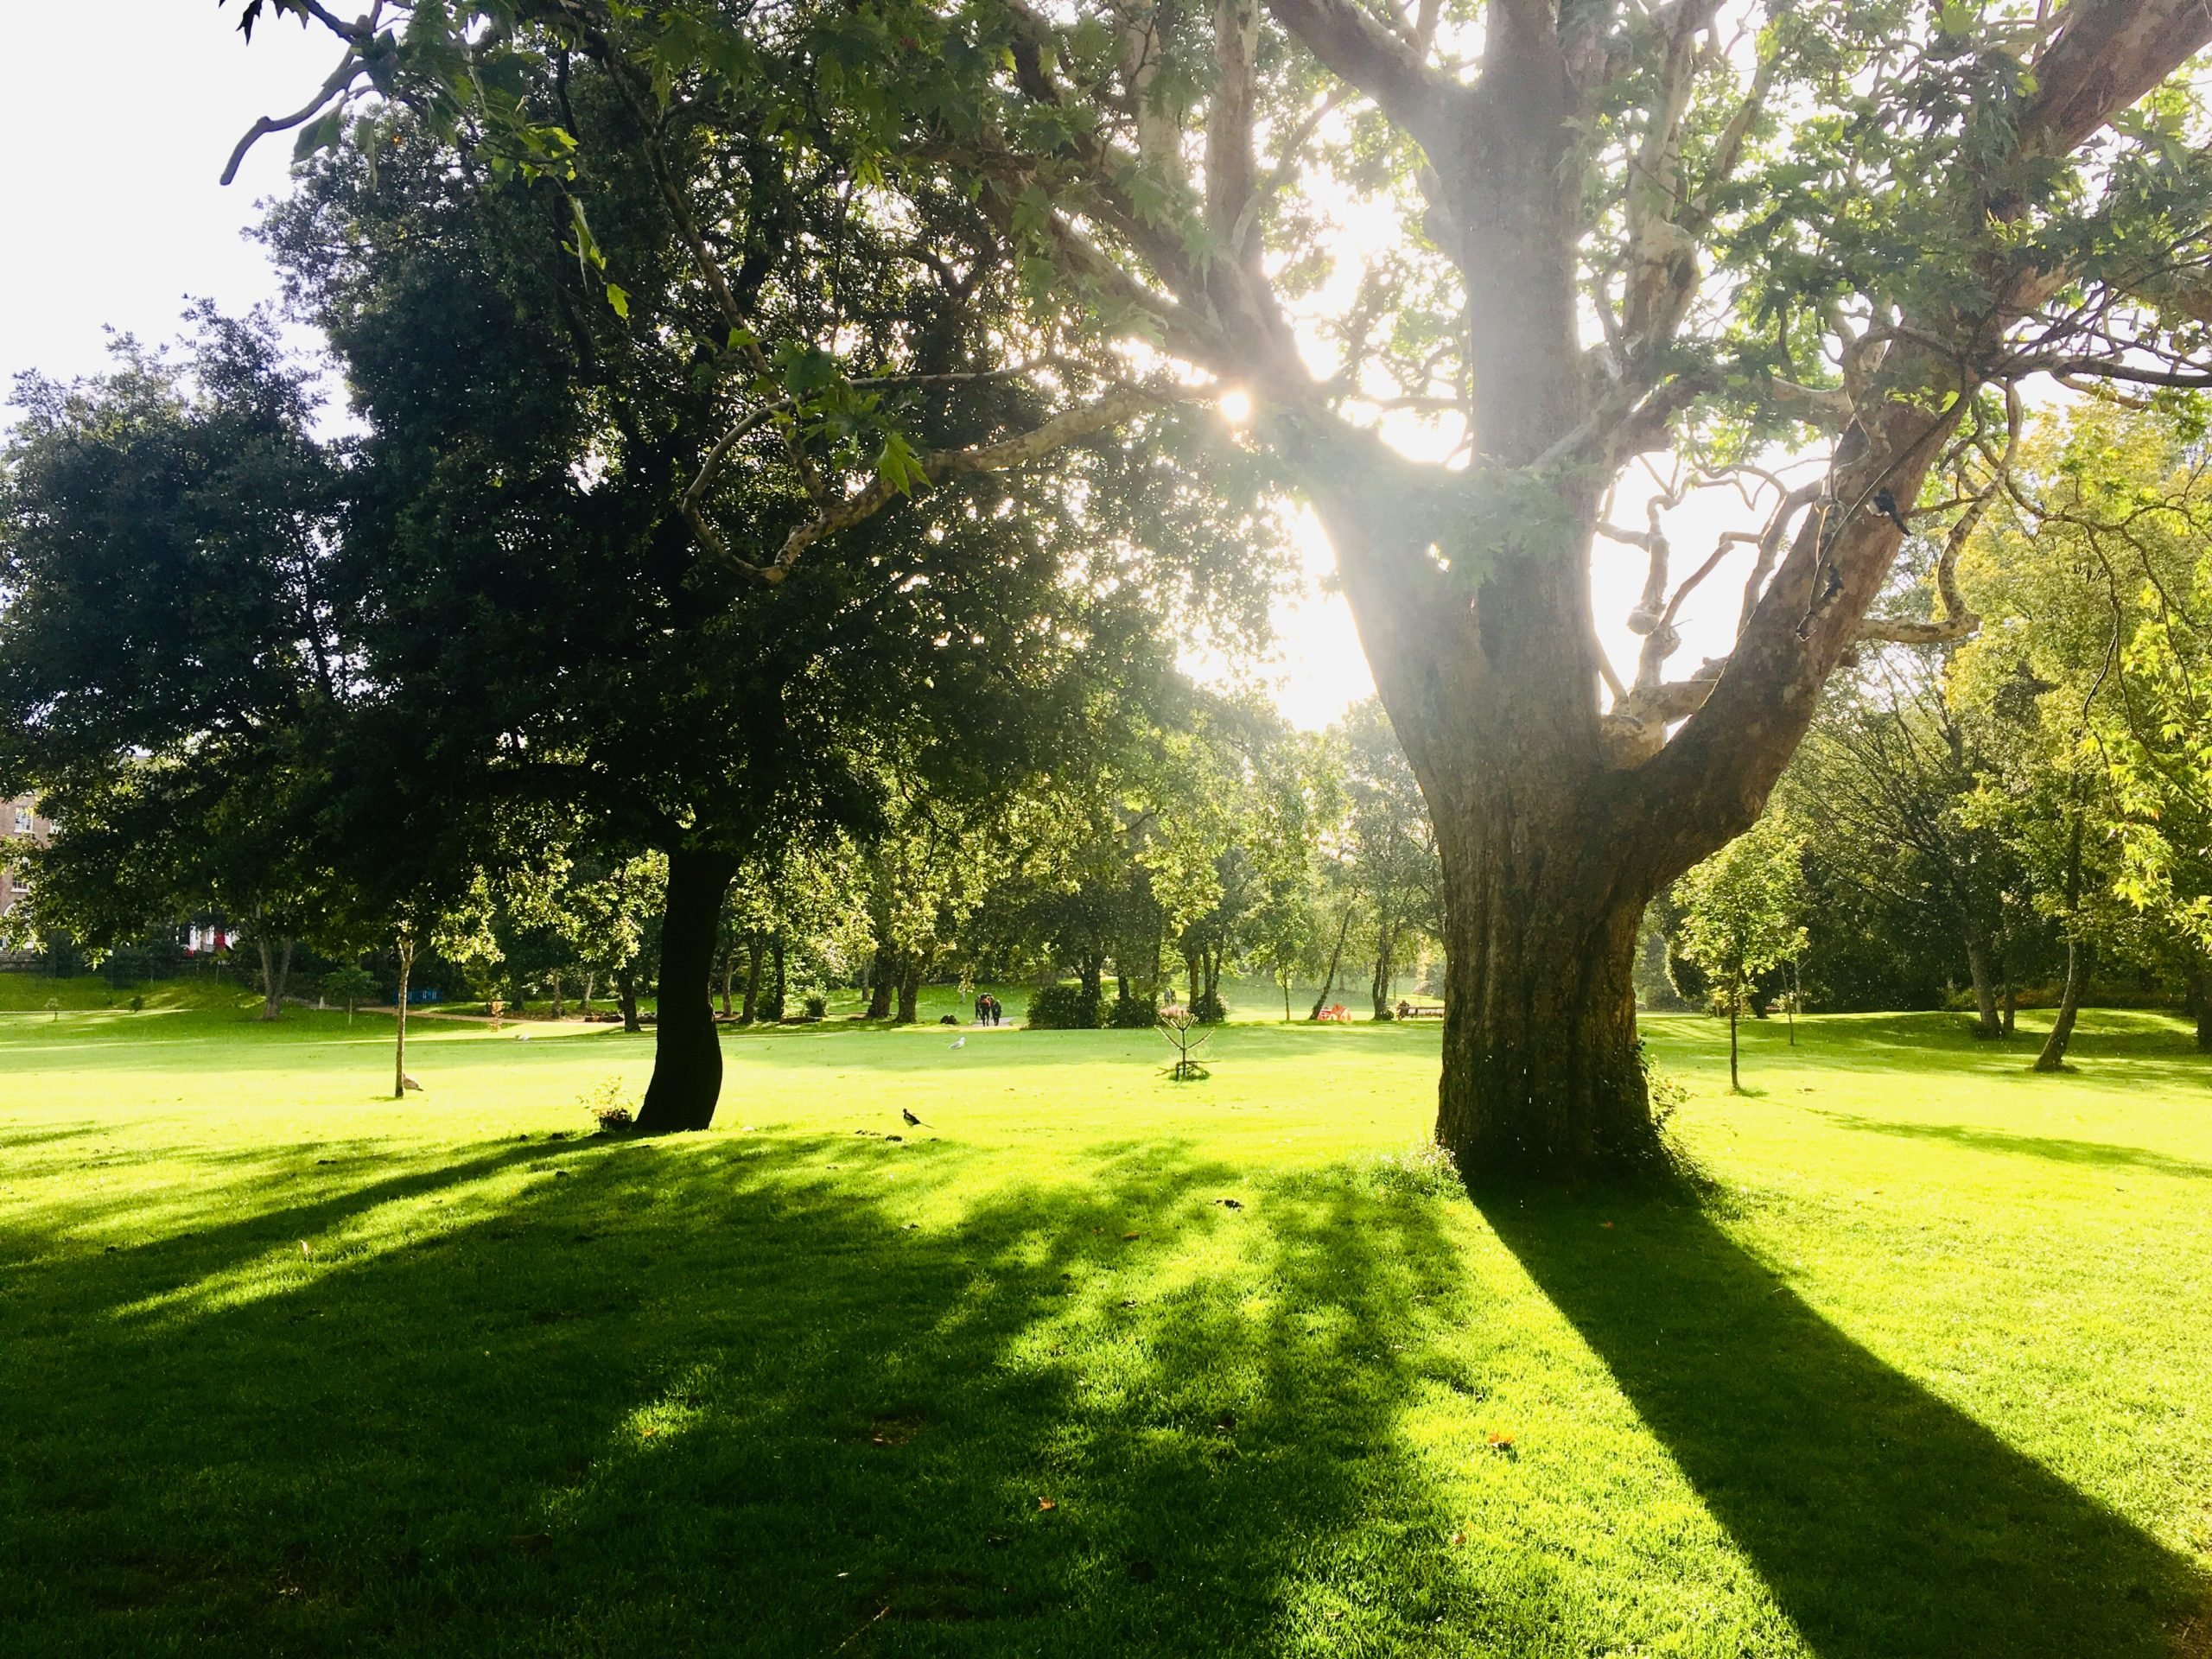 Merrion Square Park Dublin | Spotted by Locals